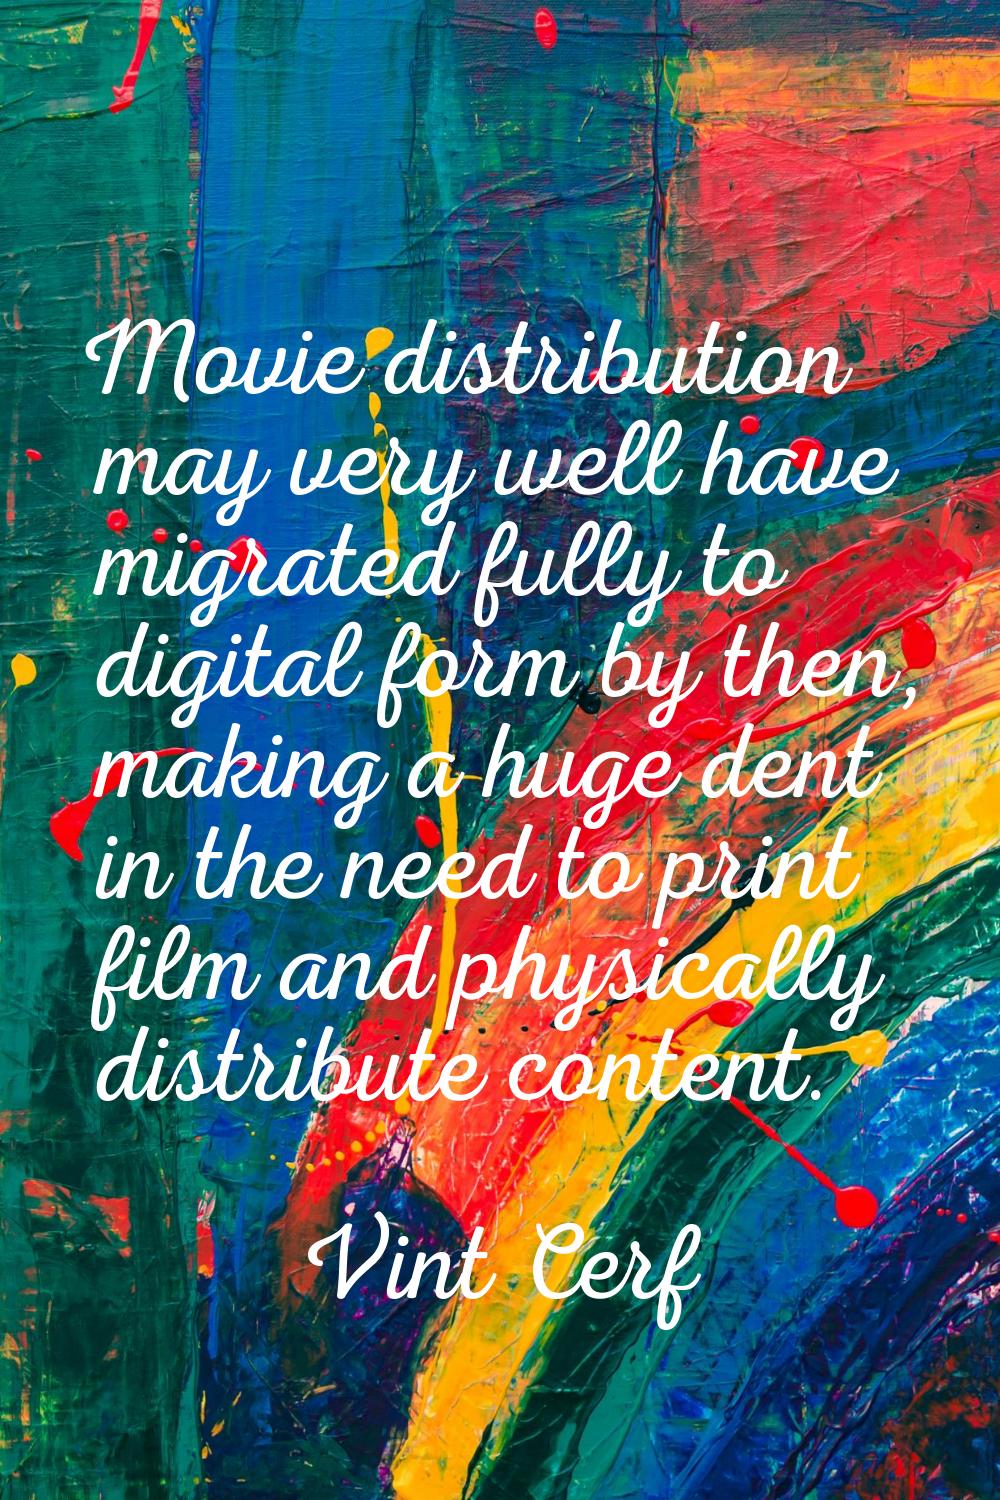 Movie distribution may very well have migrated fully to digital form by then, making a huge dent in